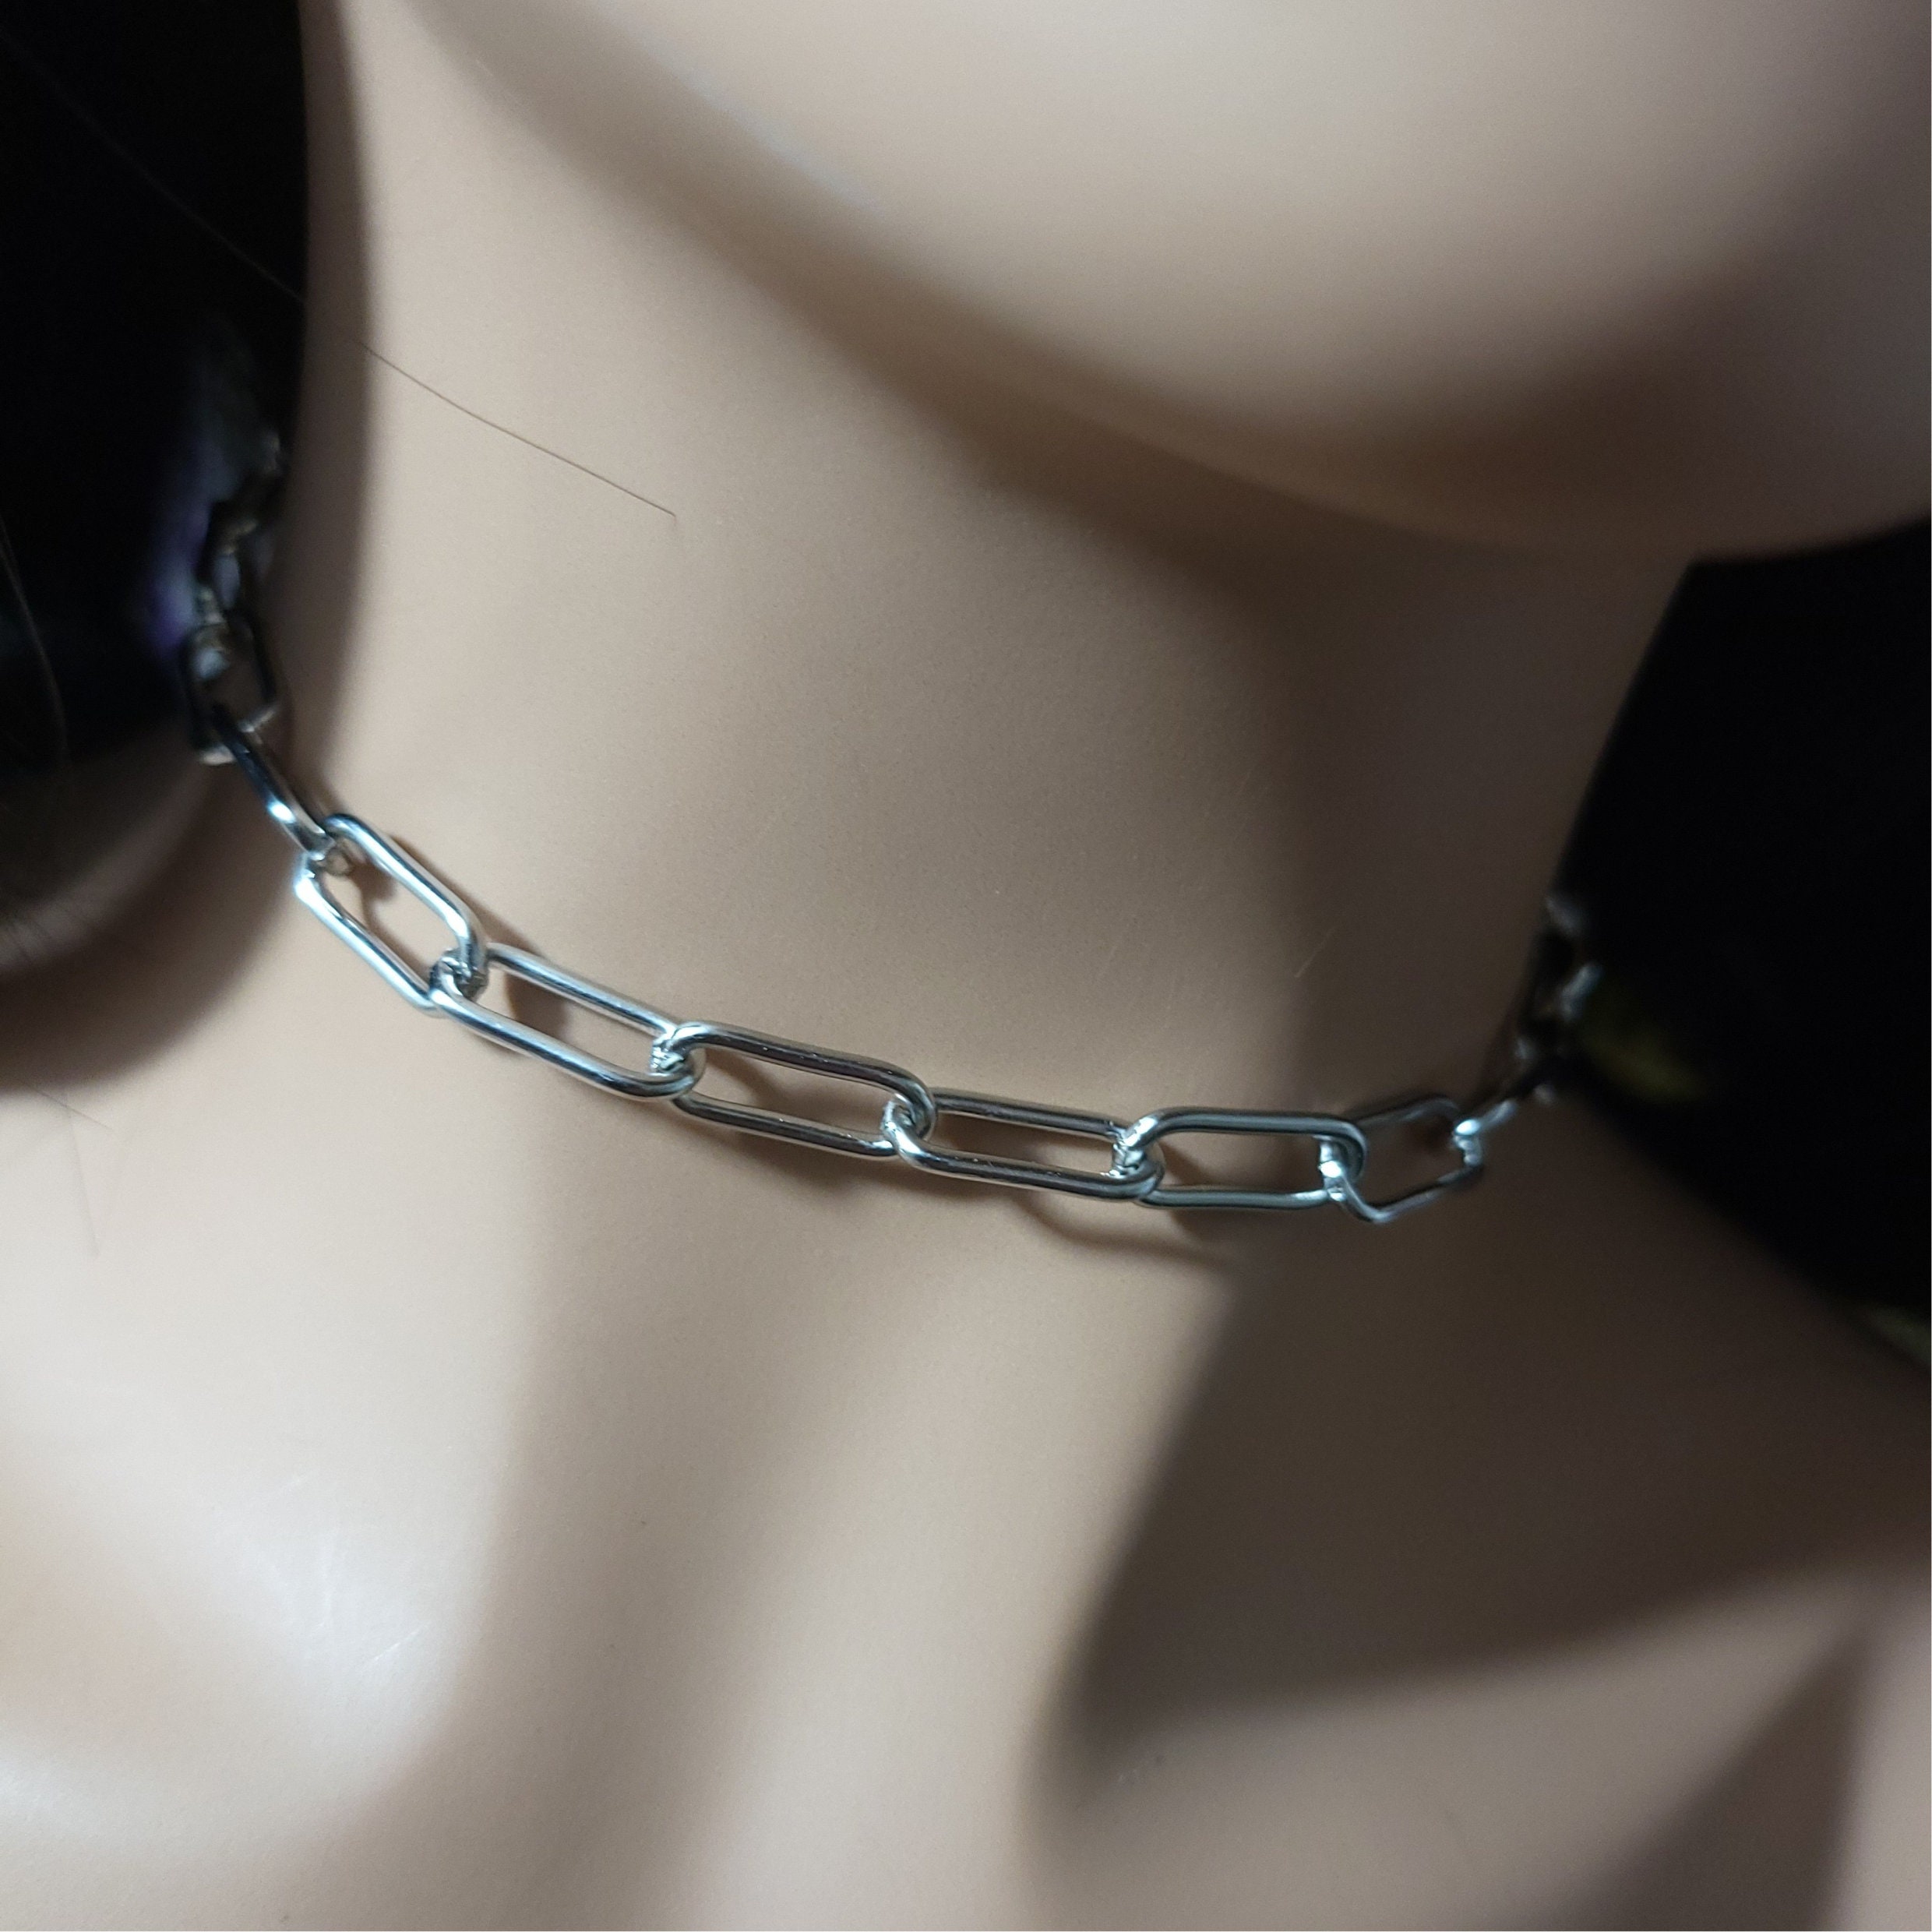 Choker of silver stainless steel chains. Alt fashion.